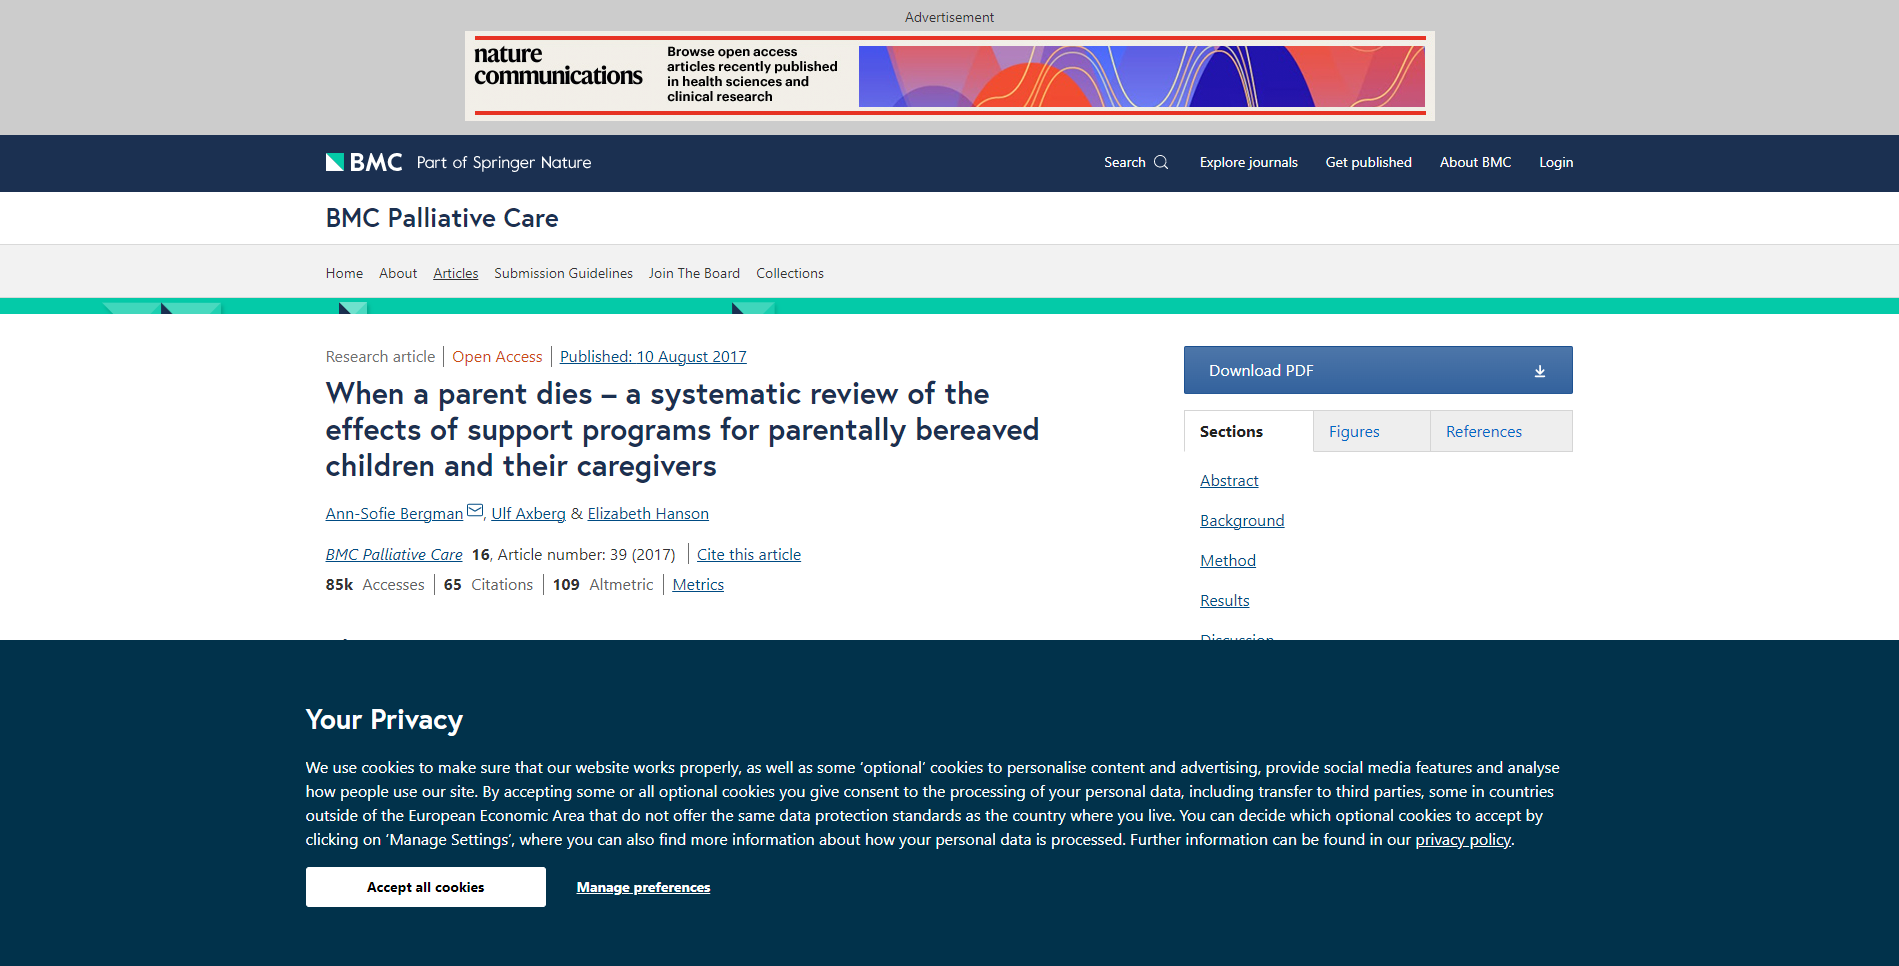 When a parent dies – a systematic review of the effects of support programs for parentally bereaved children and their caregivers